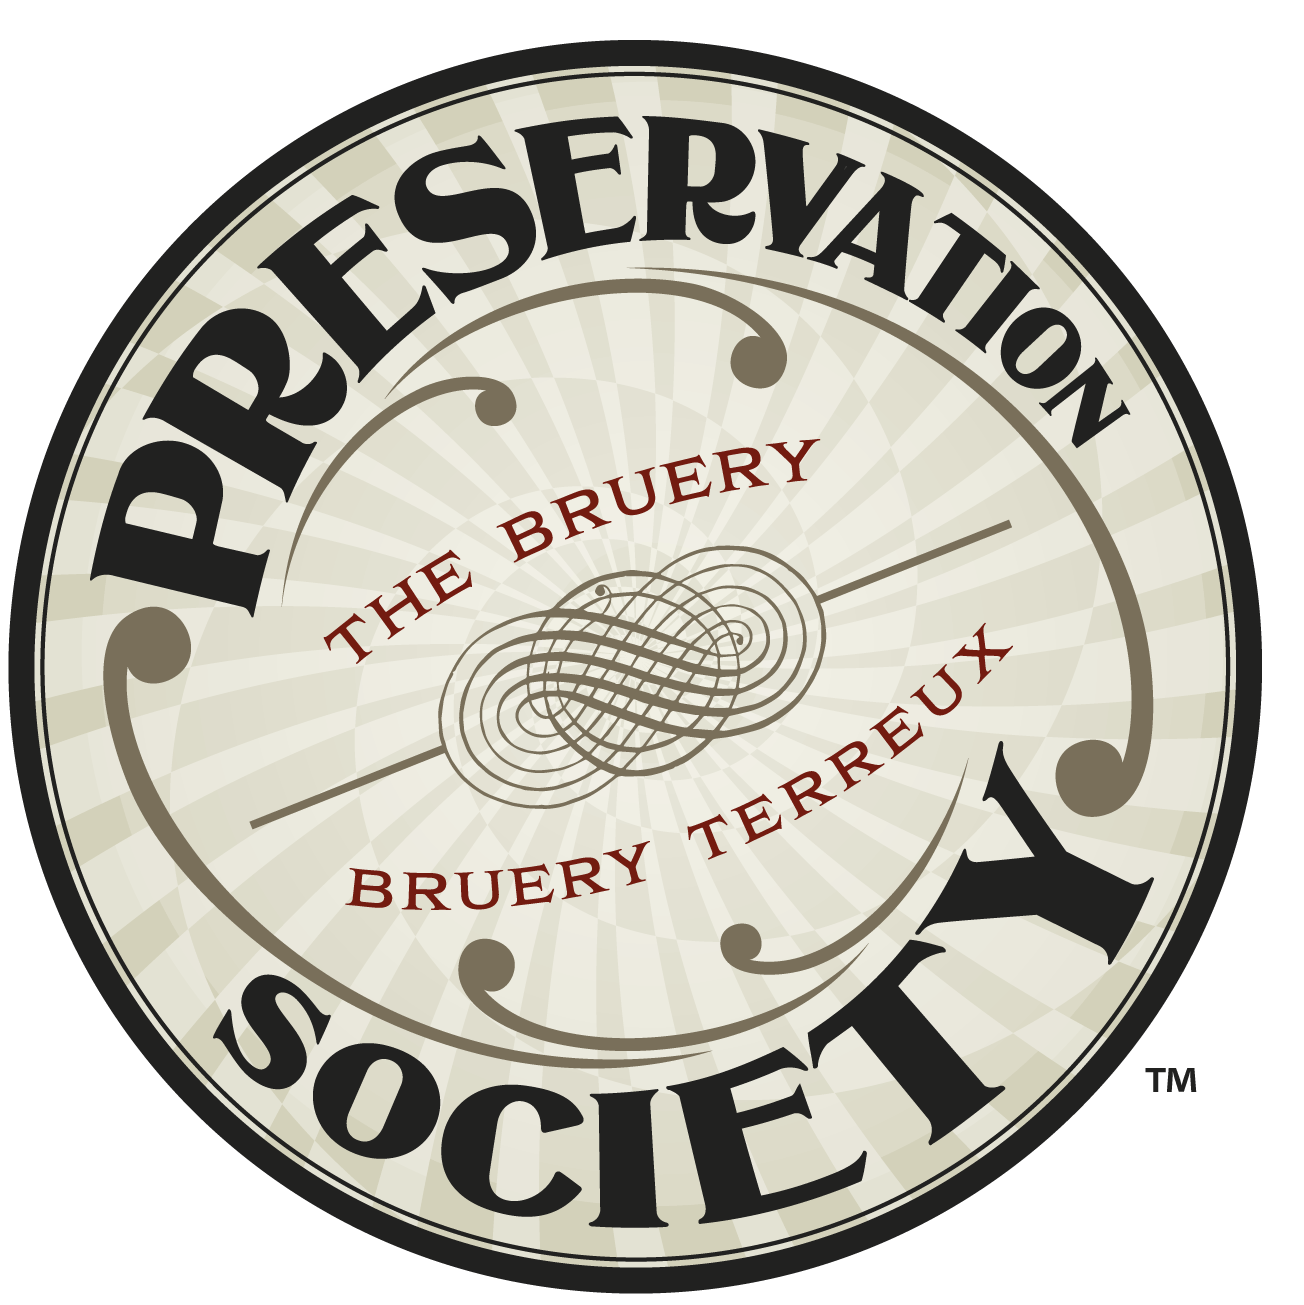 Bruery Logo - Now Available, The Preservation Society Quarter 4 Package | The Bruery